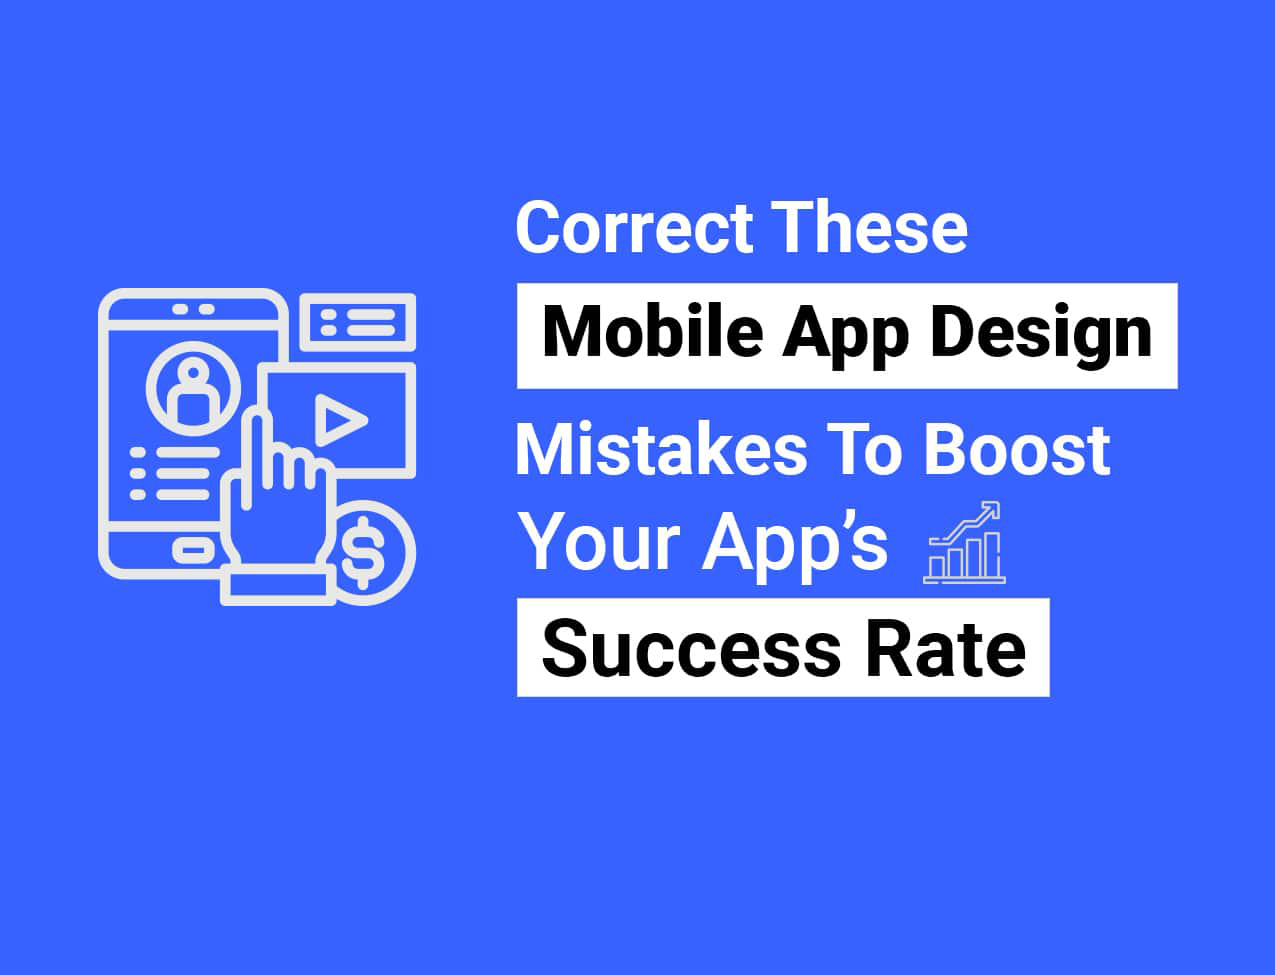 Correct These Mobile App Design Mistakes To Boost Your App’s Success Rate